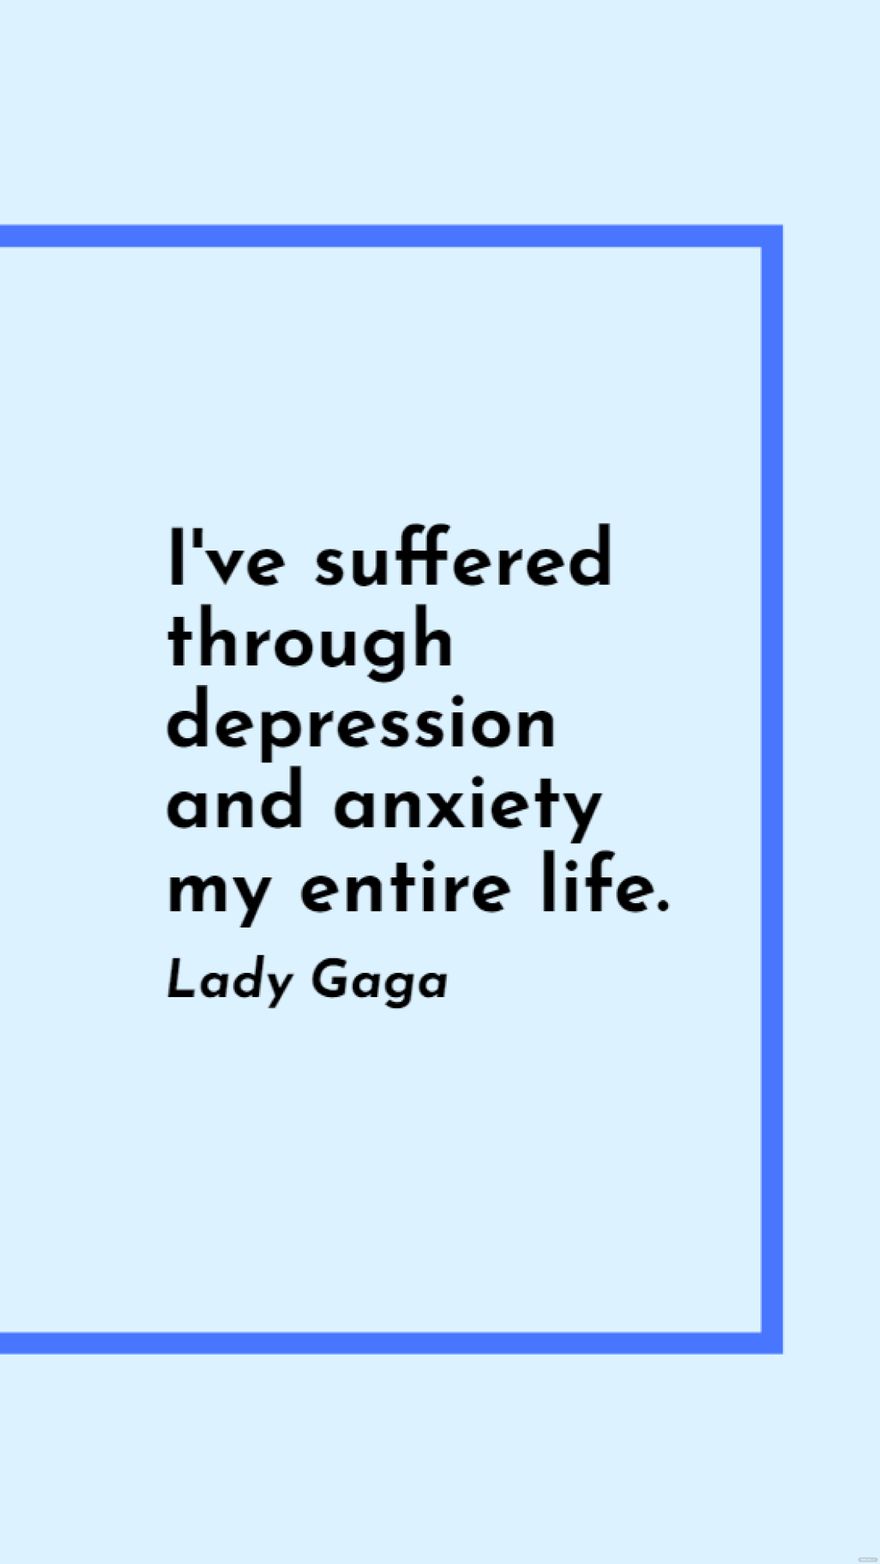 Lady Gaga - I've suffered through depression and anxiety my entire life.